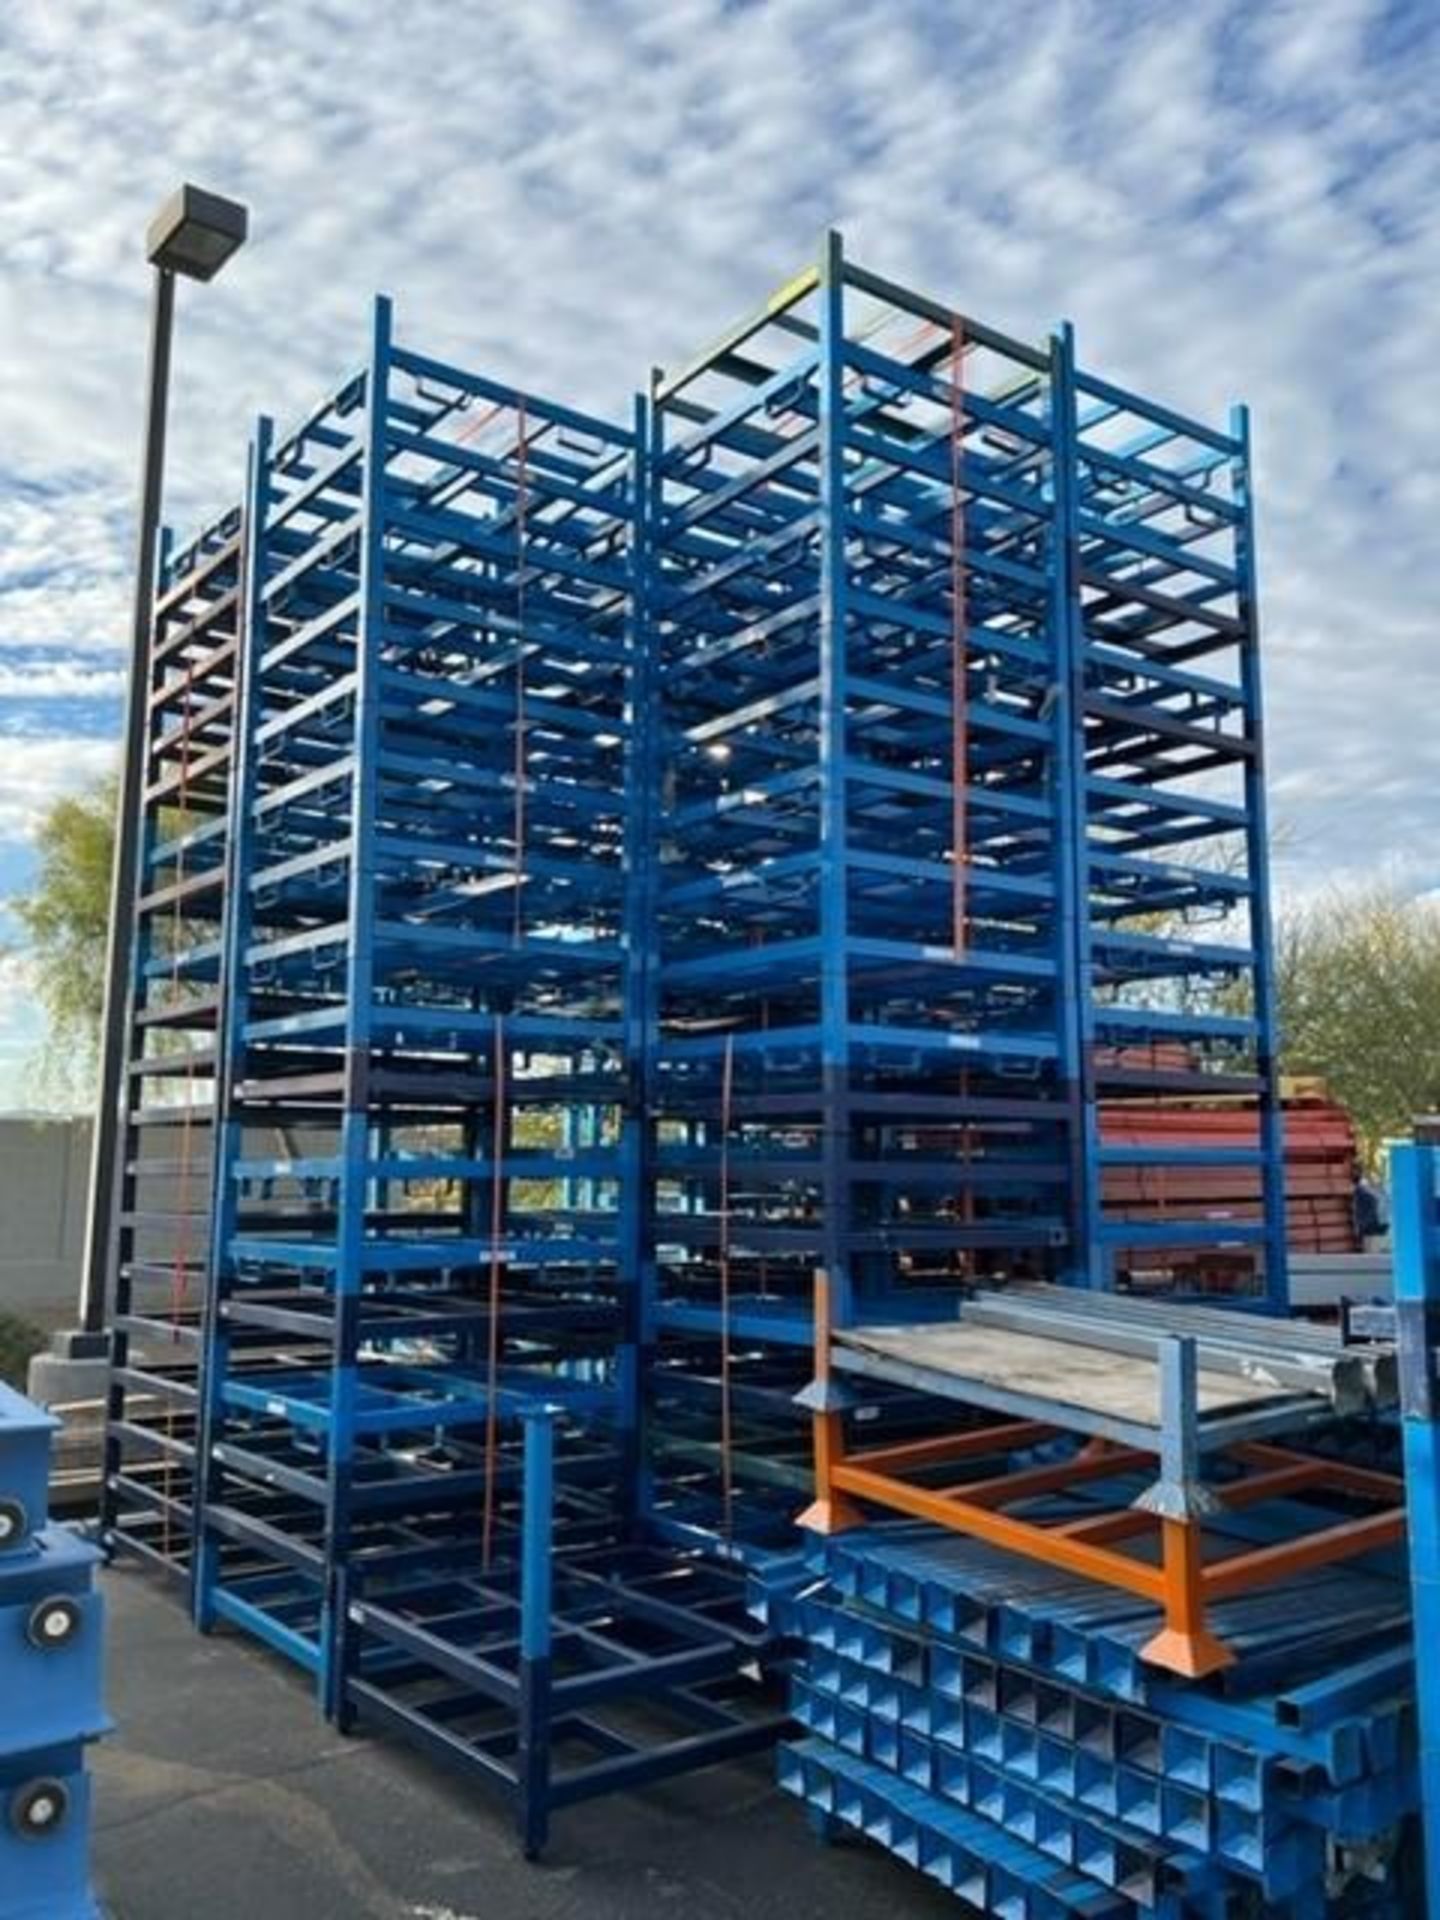 (150X) USED STACK RACK 48" X 48" X 48" COLOR LIGHT BLUE , LOCATION: 13770 W. PEORIA AVE, SURPRISE, A